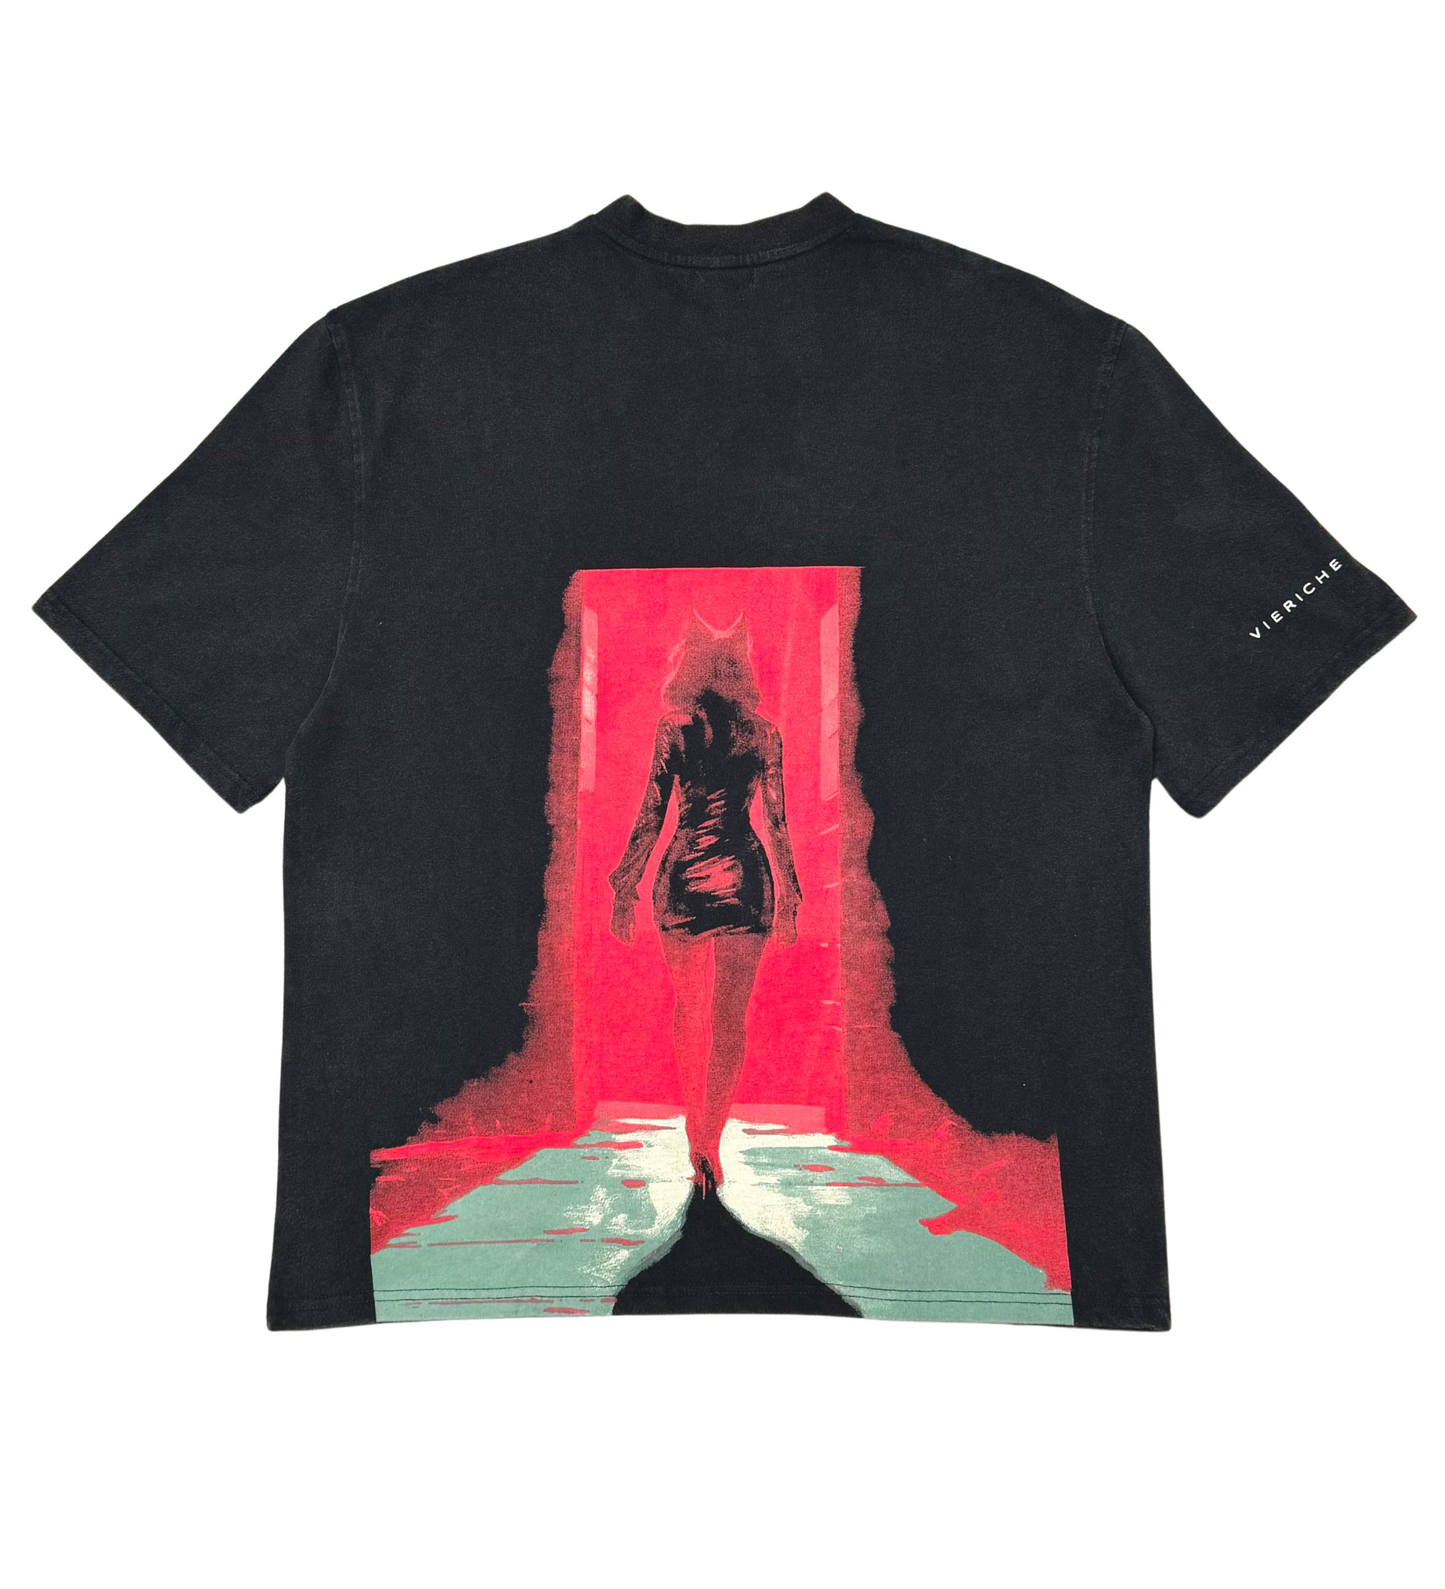 Toxic Obsession Tee